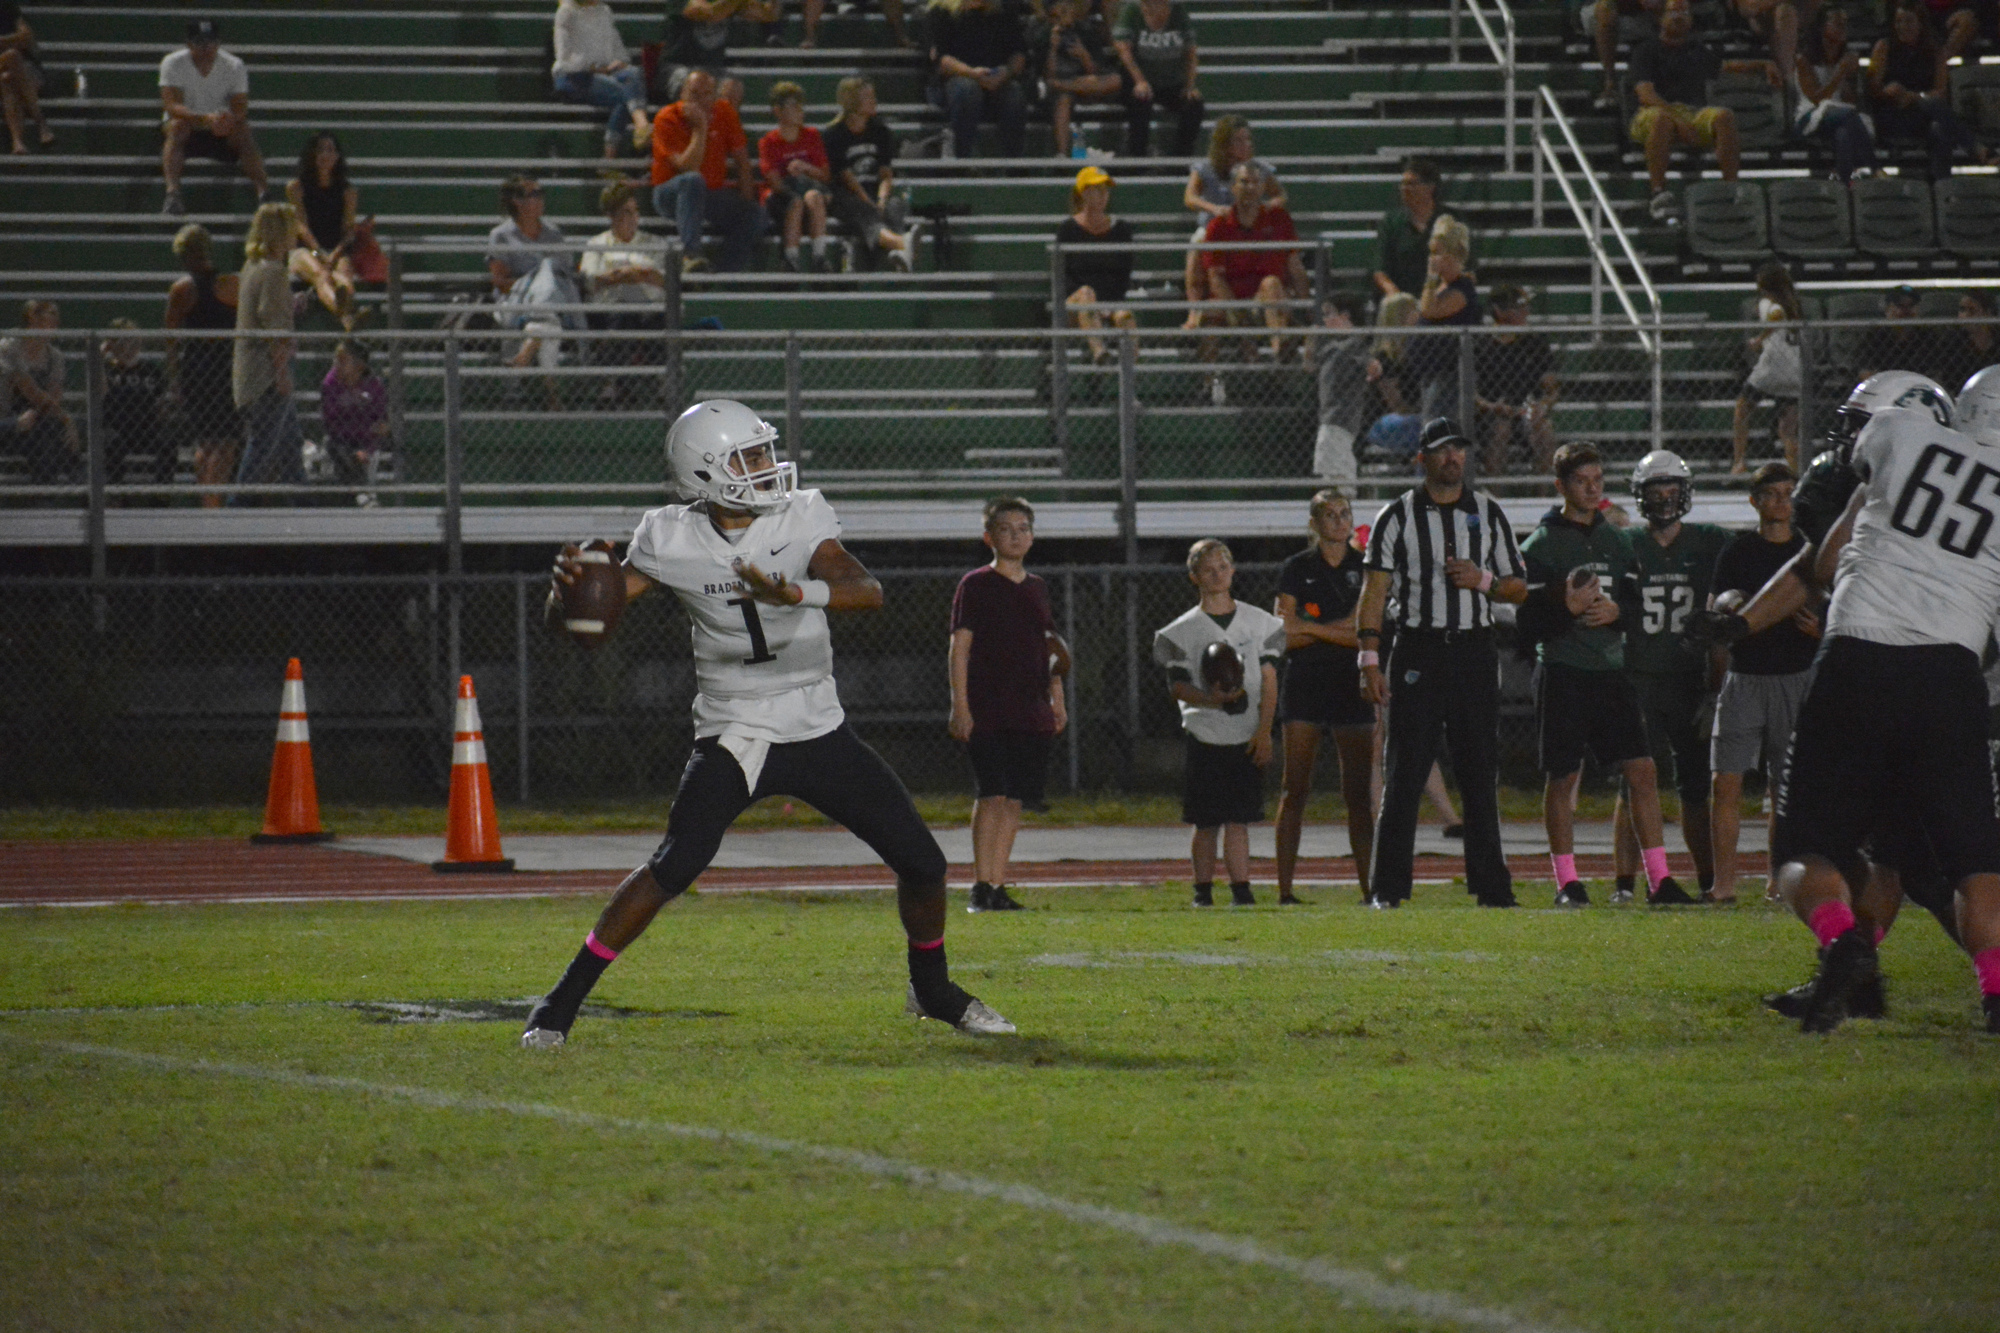 Pirates sophomore quarterback Shawqi Itraish (1) threw a touchdown pass in the second half against the Mustangs.